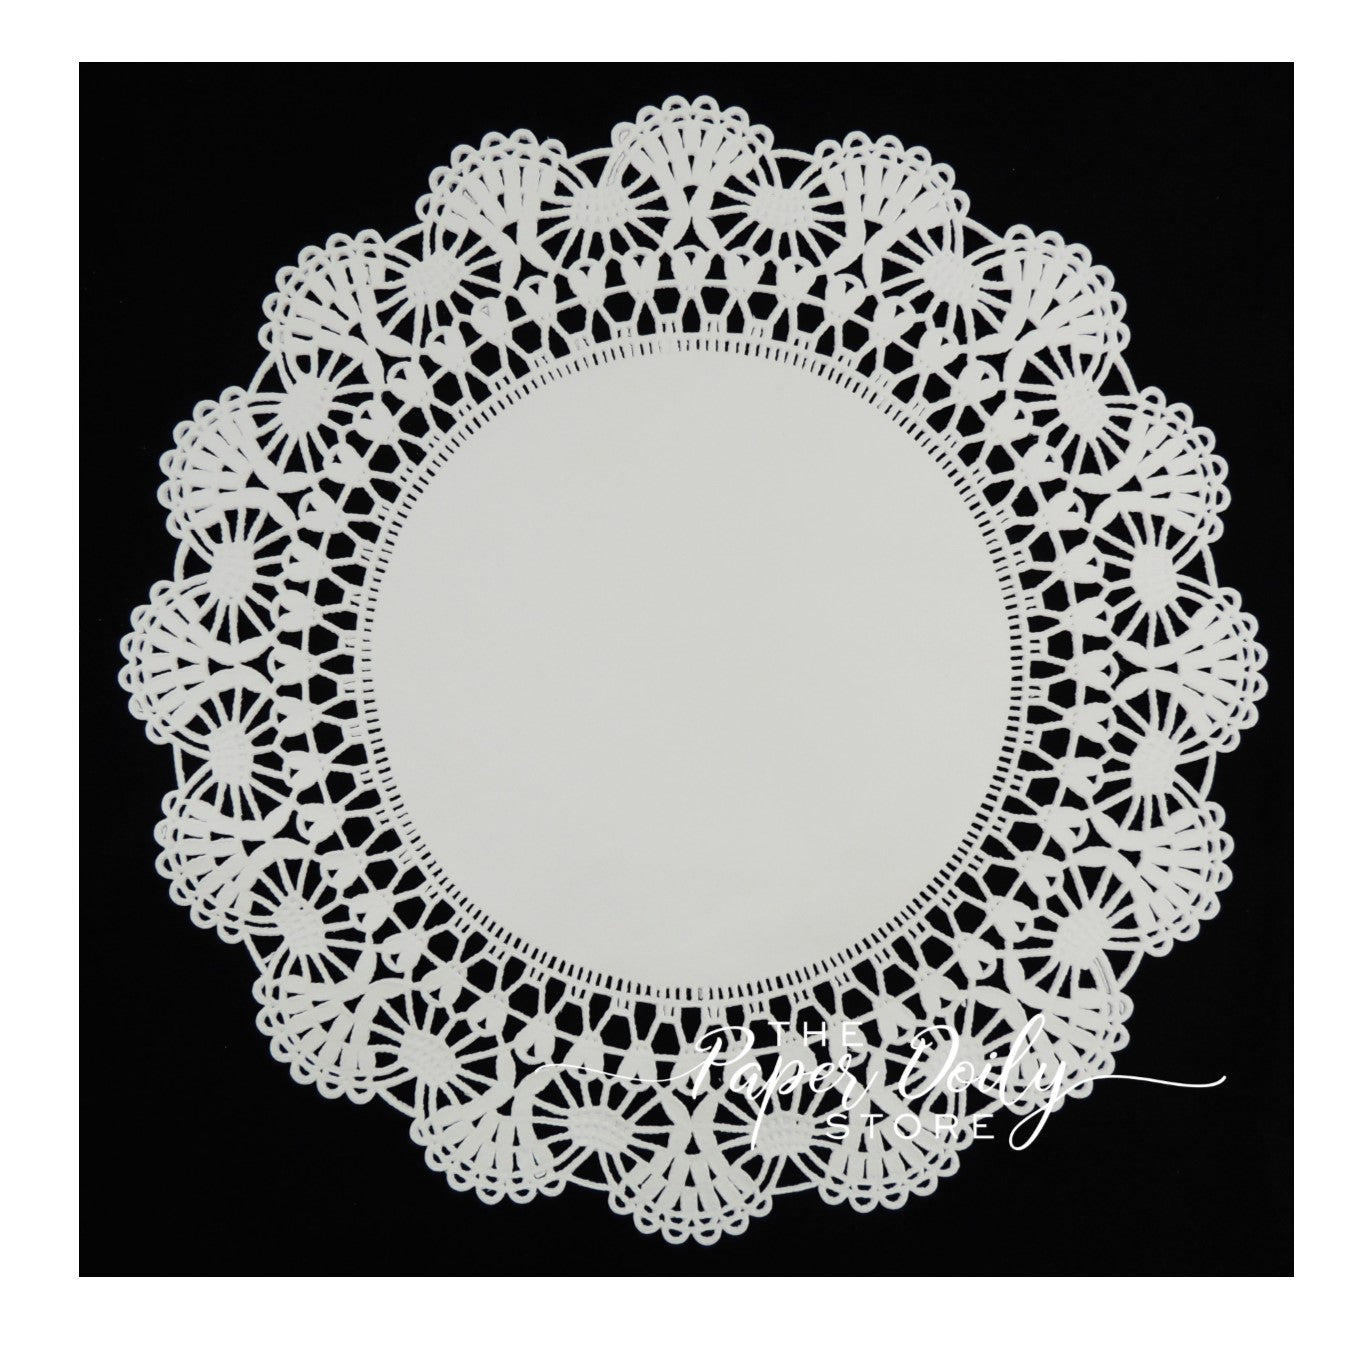 100 - 12 WHITE Normandy PAPER Lace DOILIES Chargers White Doily